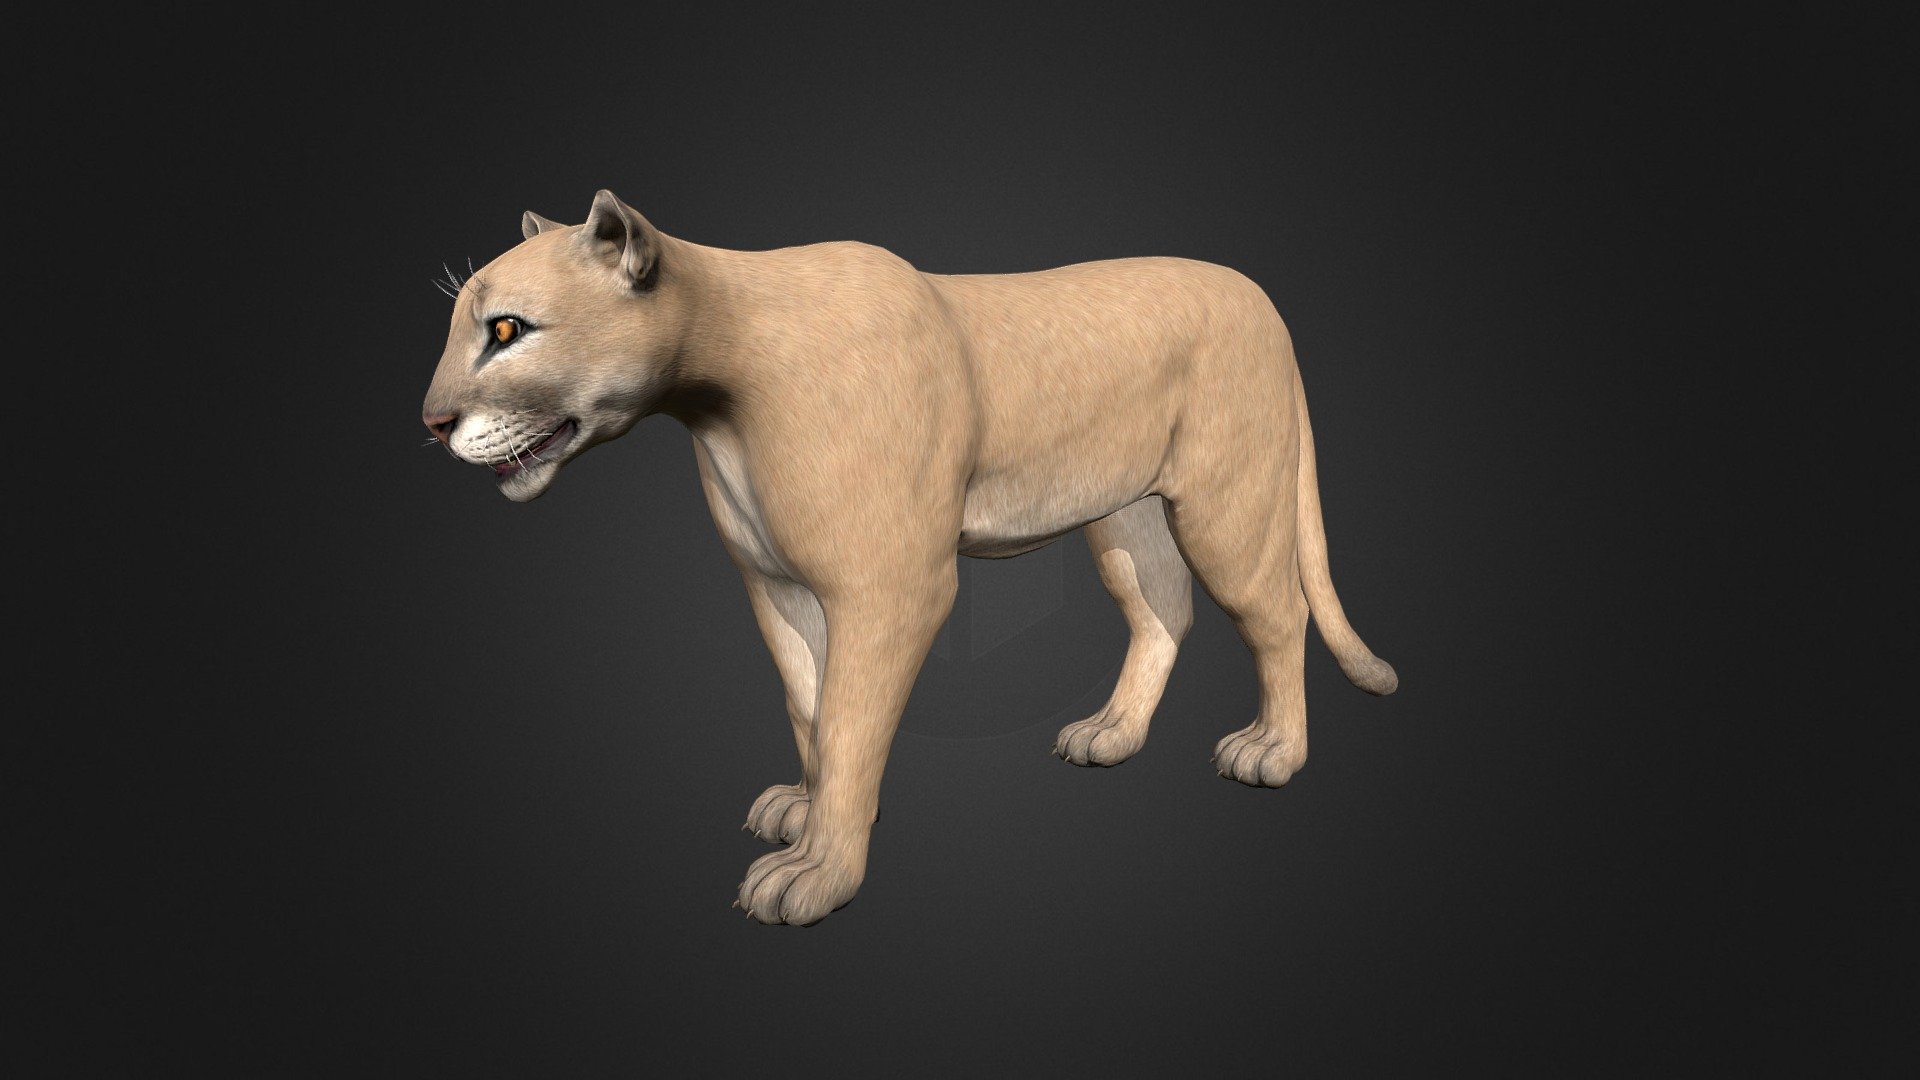 This asset has Puma model.

Model has 4 LOD.




23200 tris

16350 tris

9600 tris

4400 tris

Diffuse, normal and metallic / roughness maps (all maps 2048x2048).

76 animations (IP/RM)

Attack(1-3), walk (F,FL,FR,B,BL,BR), Run (F,FL,FR), Run_Jump, Trot (F,FL,FR), Swim (F,FL,FR,B,BL,BR), Swim_Idle, Swim_turn(Left/Right), Jump_In_Place, Jump_F, Jump (start/landing), Jump_Loop (up, horisontal, down),Hit (F,M,B) , Lie (Start/end), Lie_Idle 1-3, Sleep (start, idle, end), Idle 1-3, death, eat, turn (left/right) etc.

If you have any questions, please contact us by mail: Chester9292@mail.ru - Puma - Buy Royalty Free 3D model by Darina3D 3d model